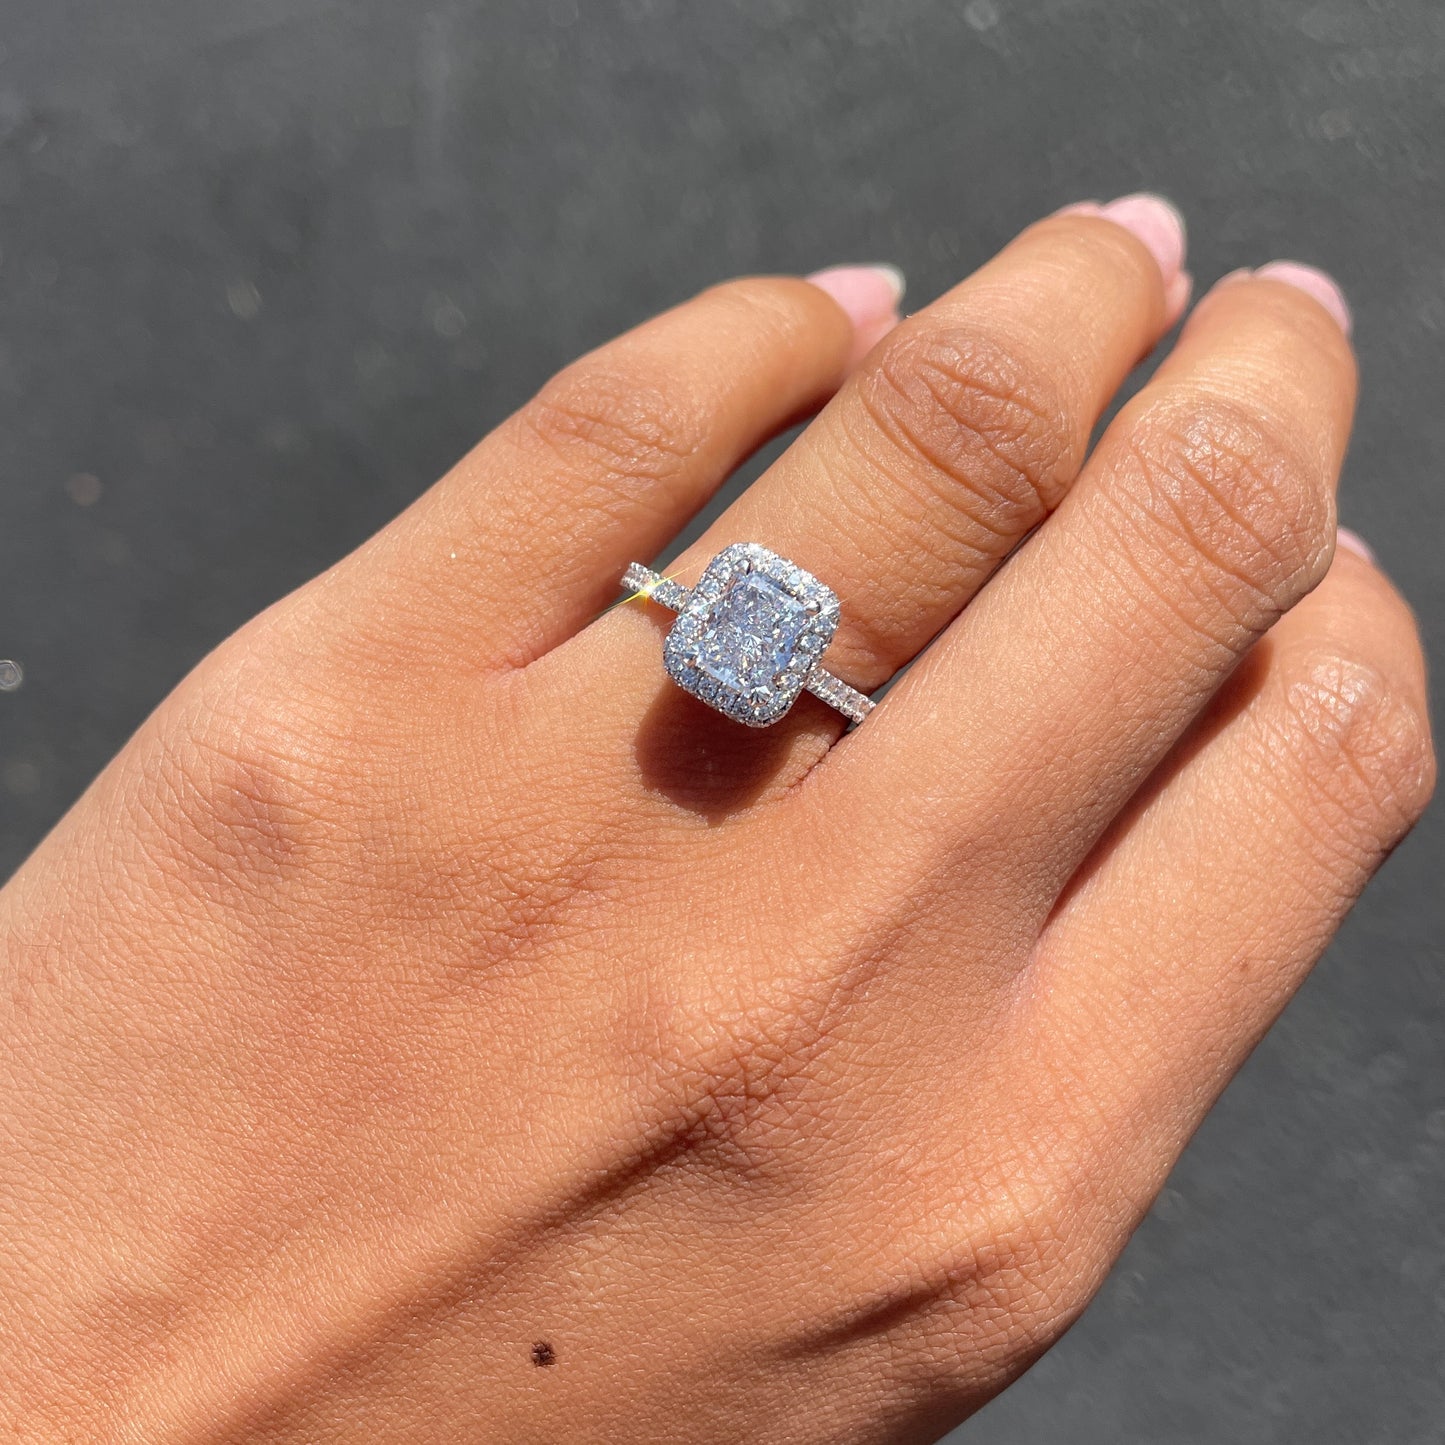 Load image into Gallery viewer, 1.51 Carat Radiant Natural Diamond Engagement Ring with 2D Halo | Engagement Ring Wednesday - Happy Jewelers Fine Jewelry Lifetime Warranty
